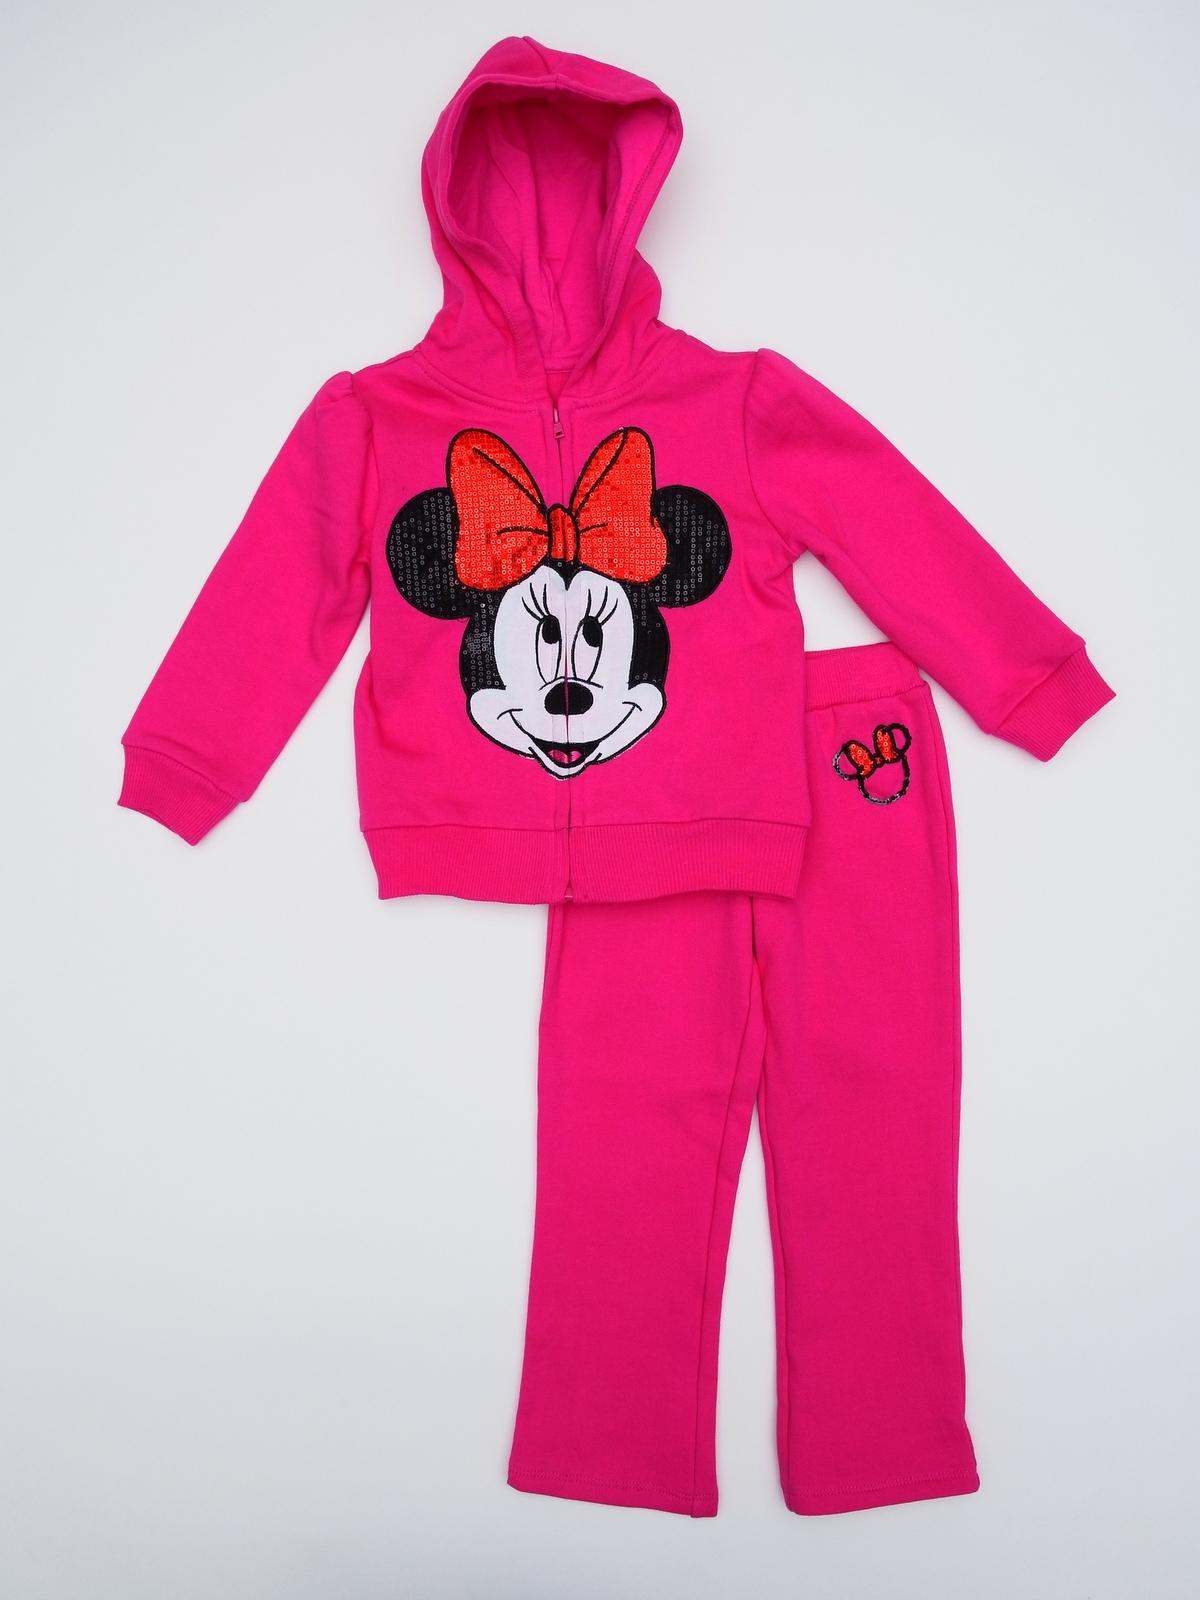 Disney Minnie Mouse Infant & Toddler Girl's Sequined Hoodie Jacket & Sweatpants